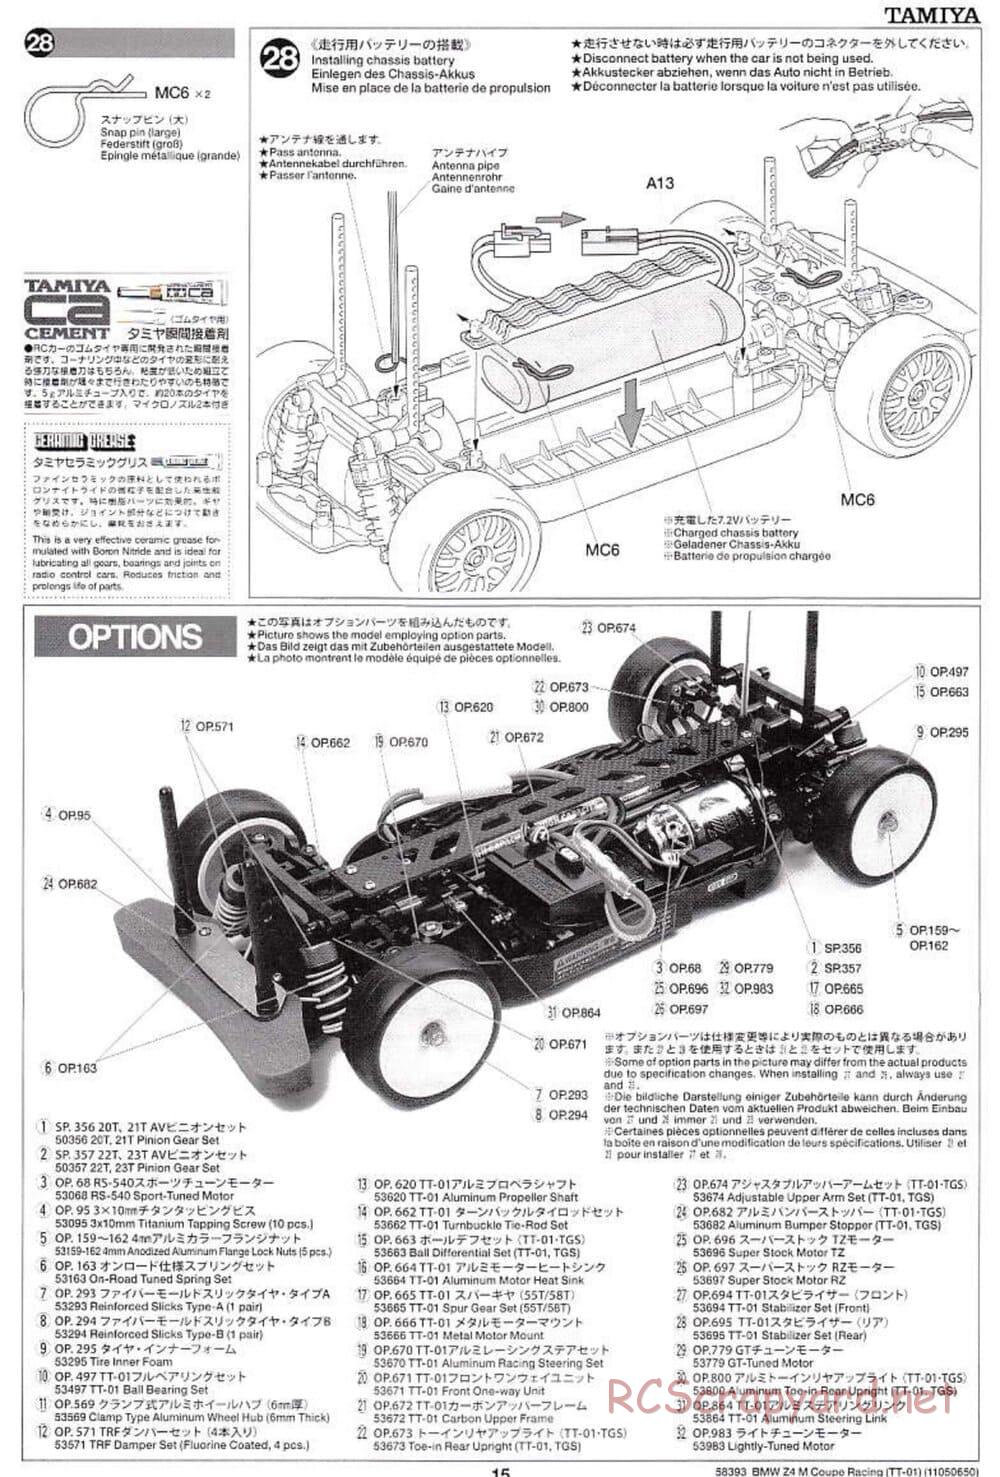 Tamiya - BMW Z4 M Coupe Racing - TT-01 Chassis - Manual - Page 15